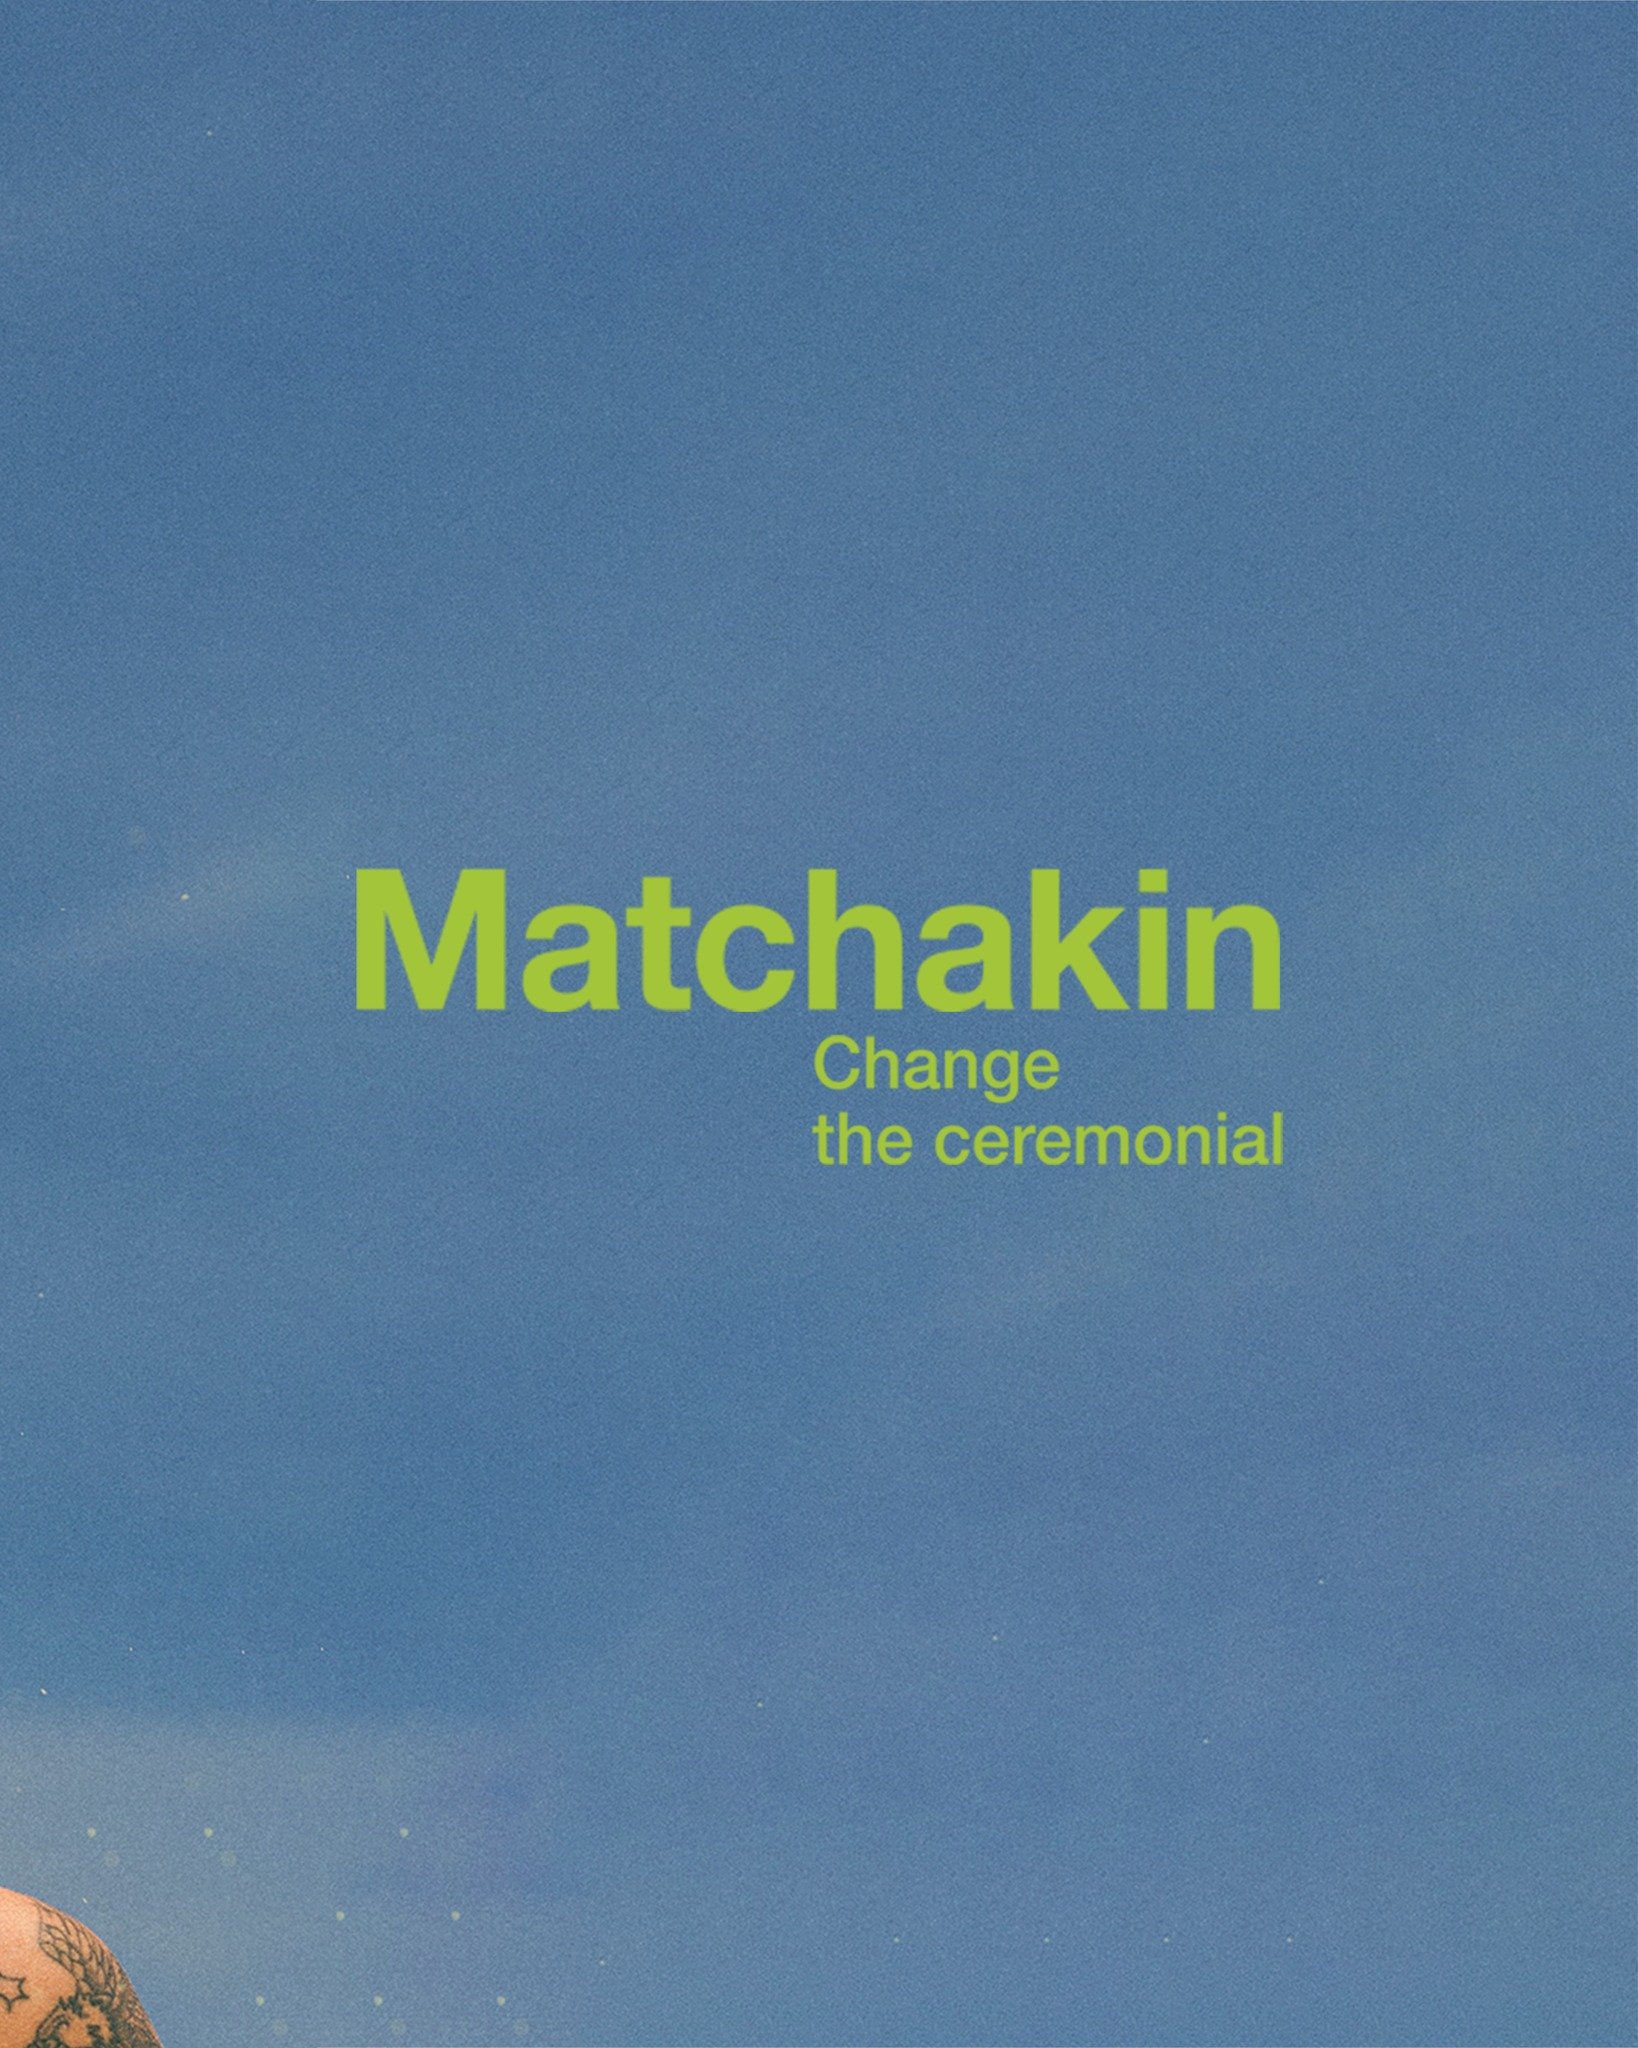 There's a new player in the matcha game and we're here to boost its campaign!

Meet @matchakin, your new green energizing powder! 🍵

#supercoolstudiobali #productphotography #fashionphotography #thebaliguideline #matchalover